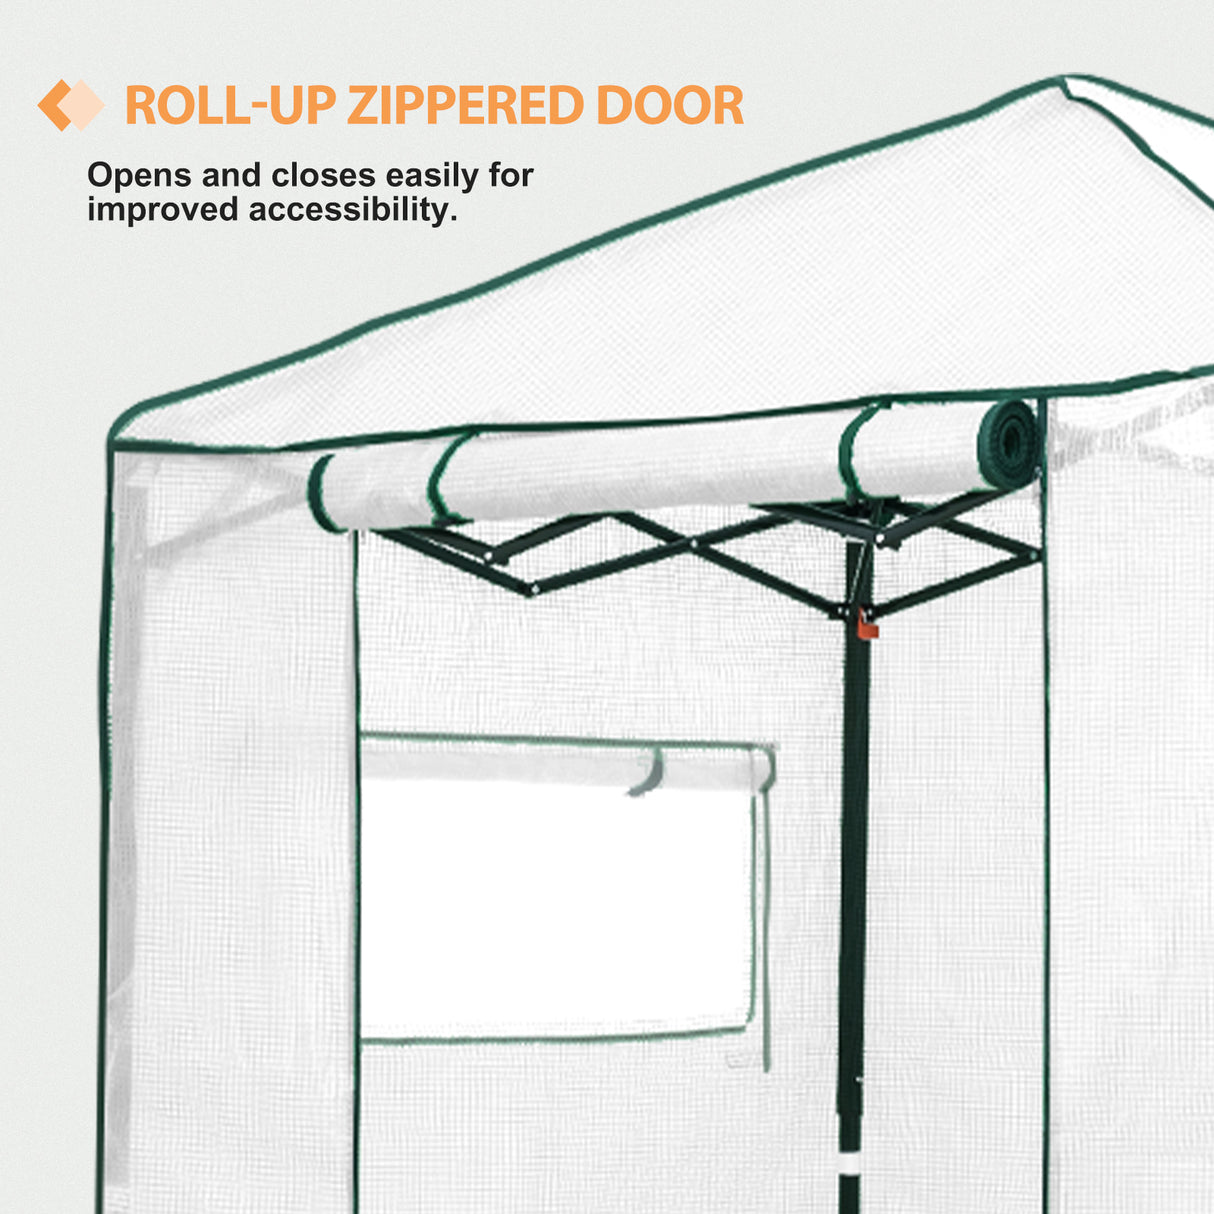 GH24 6x4 Pop Up Greenhouse Replacement Cover